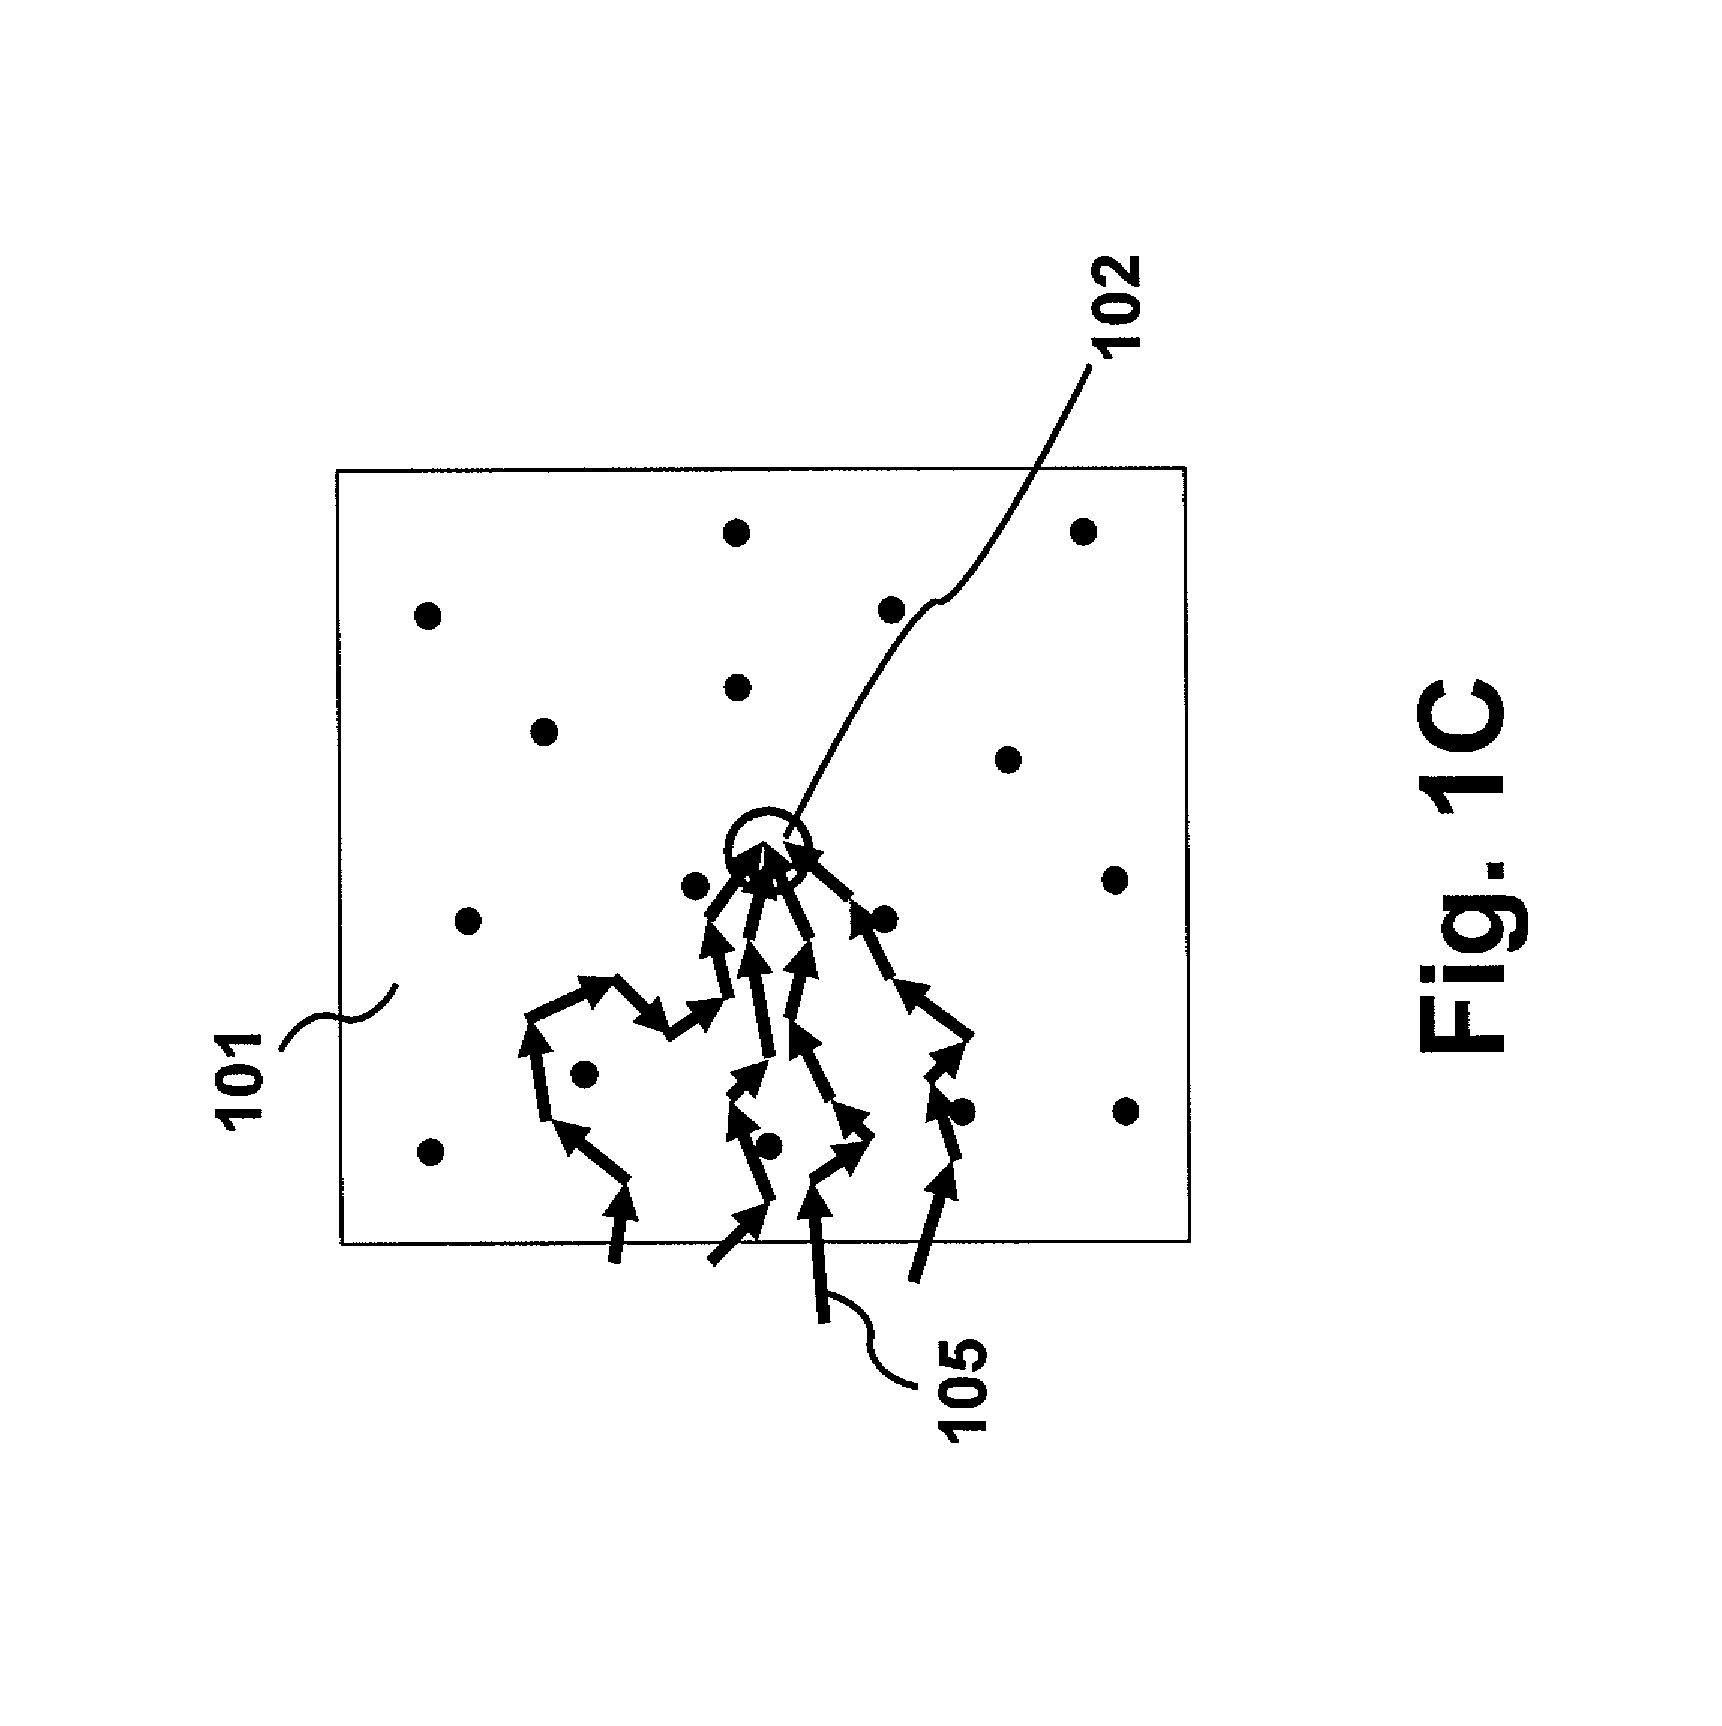 Apparatus and method for irradiating a scattering medium with a reconstructive wave